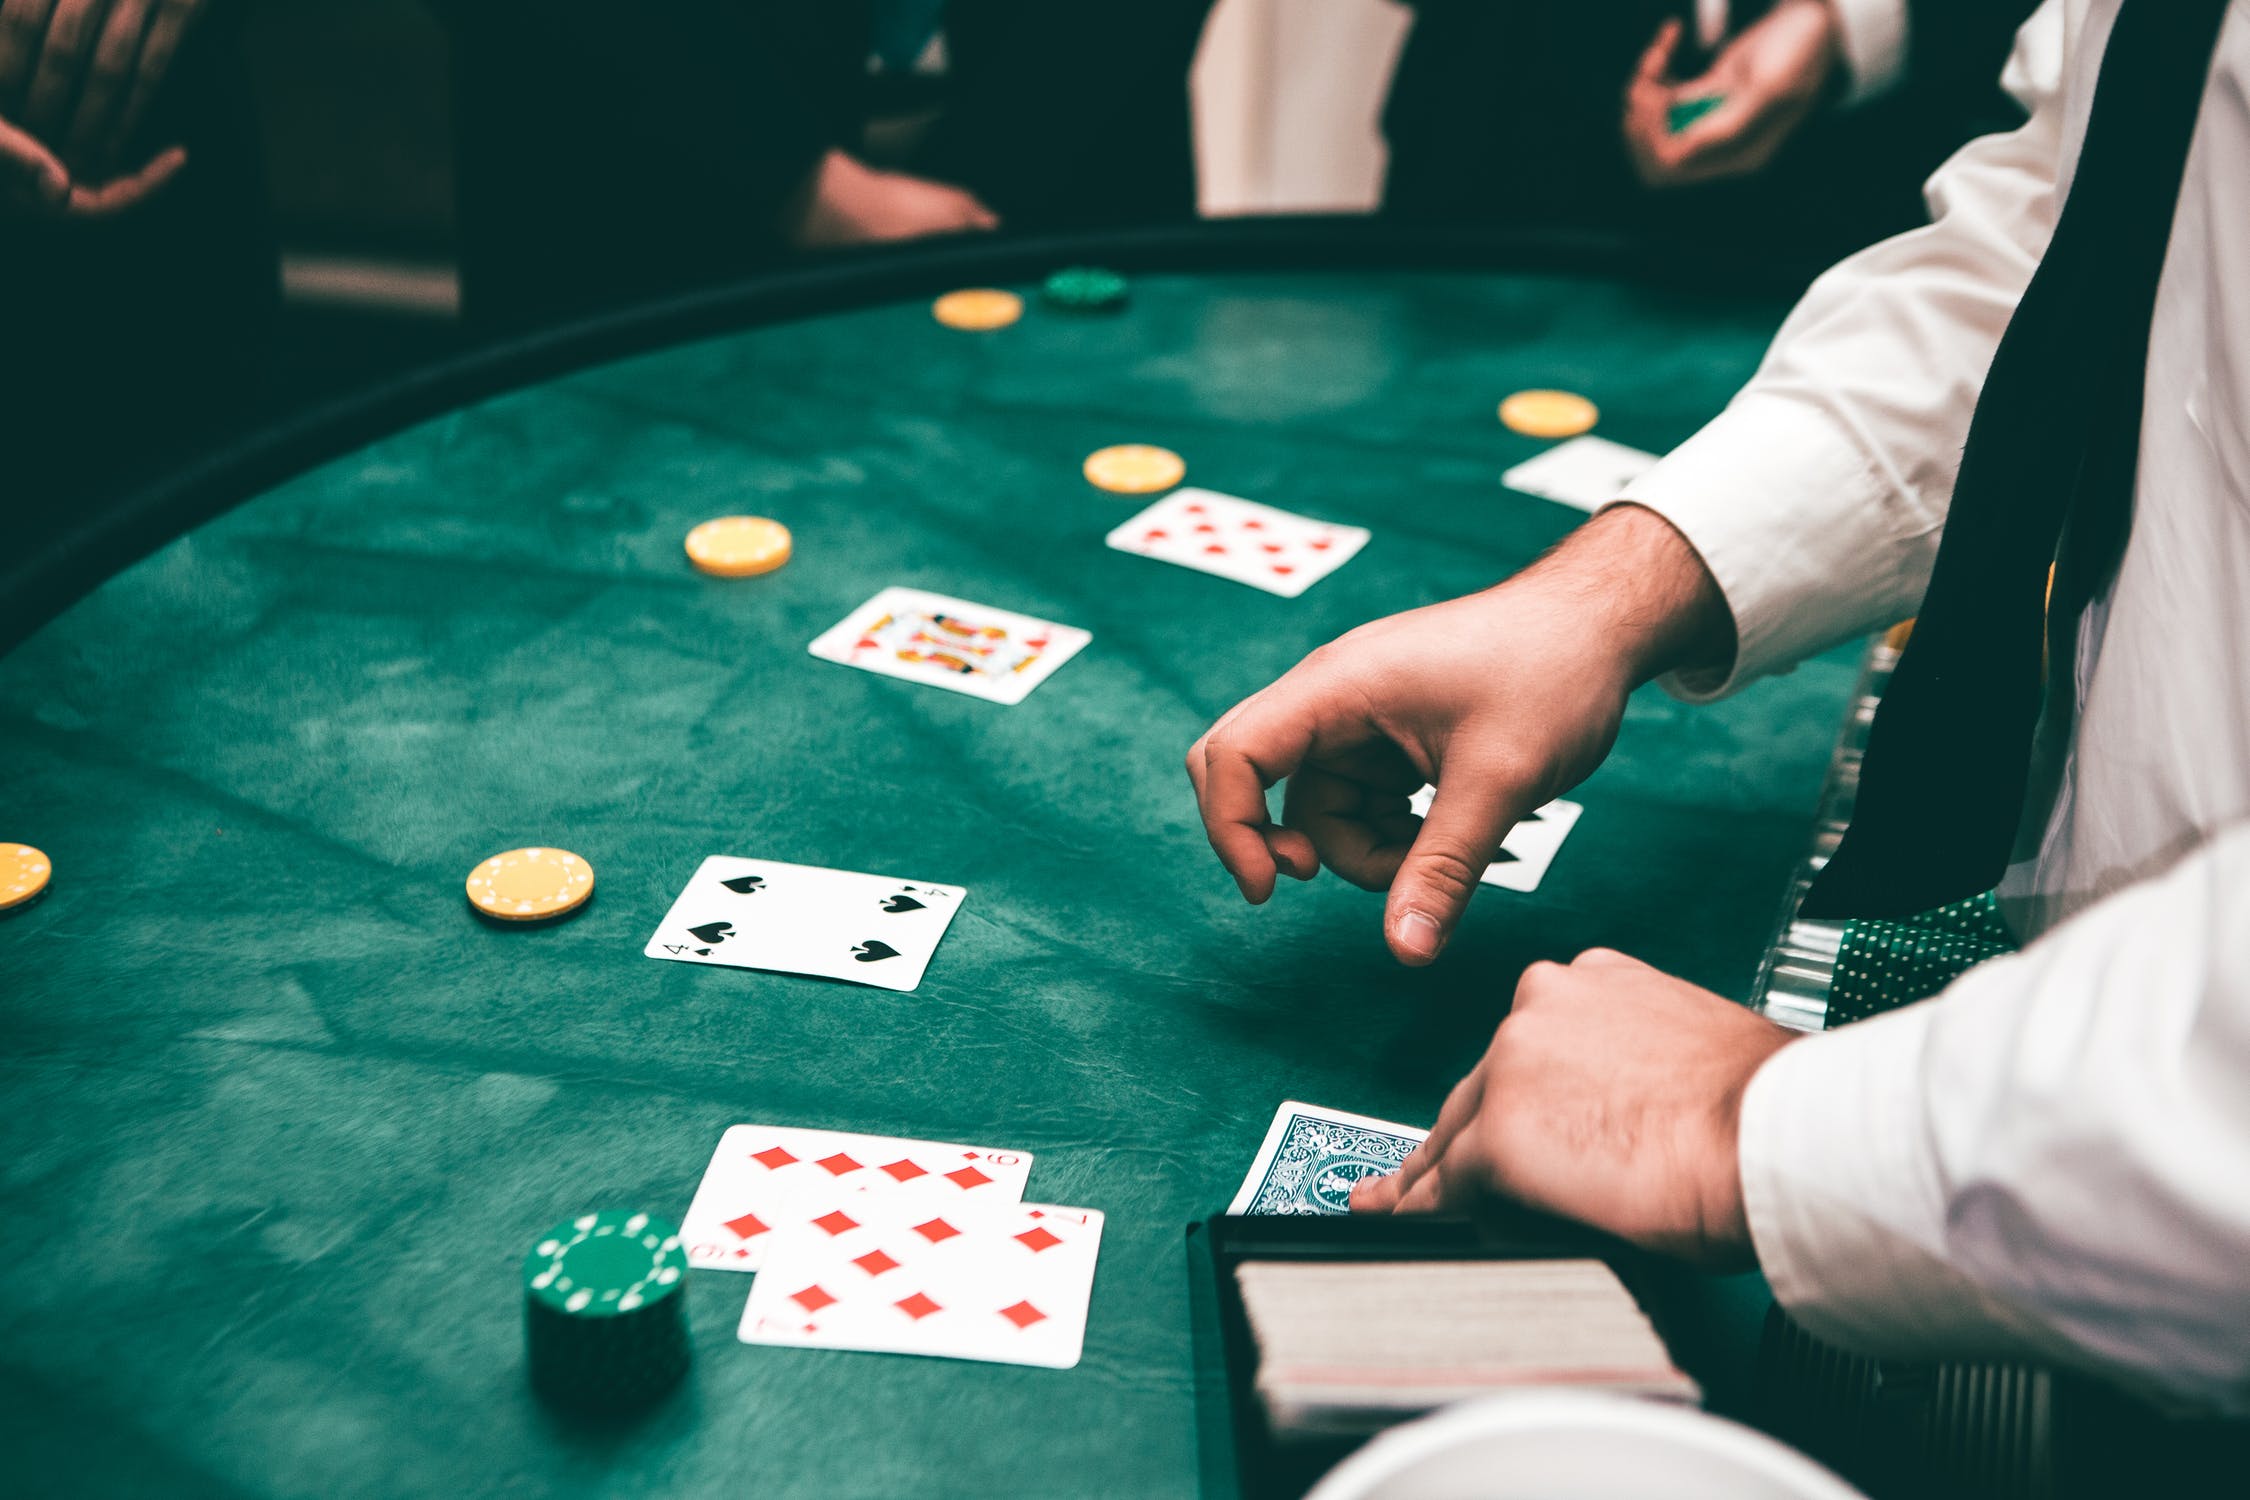 Learn About Playing Blackjack Online